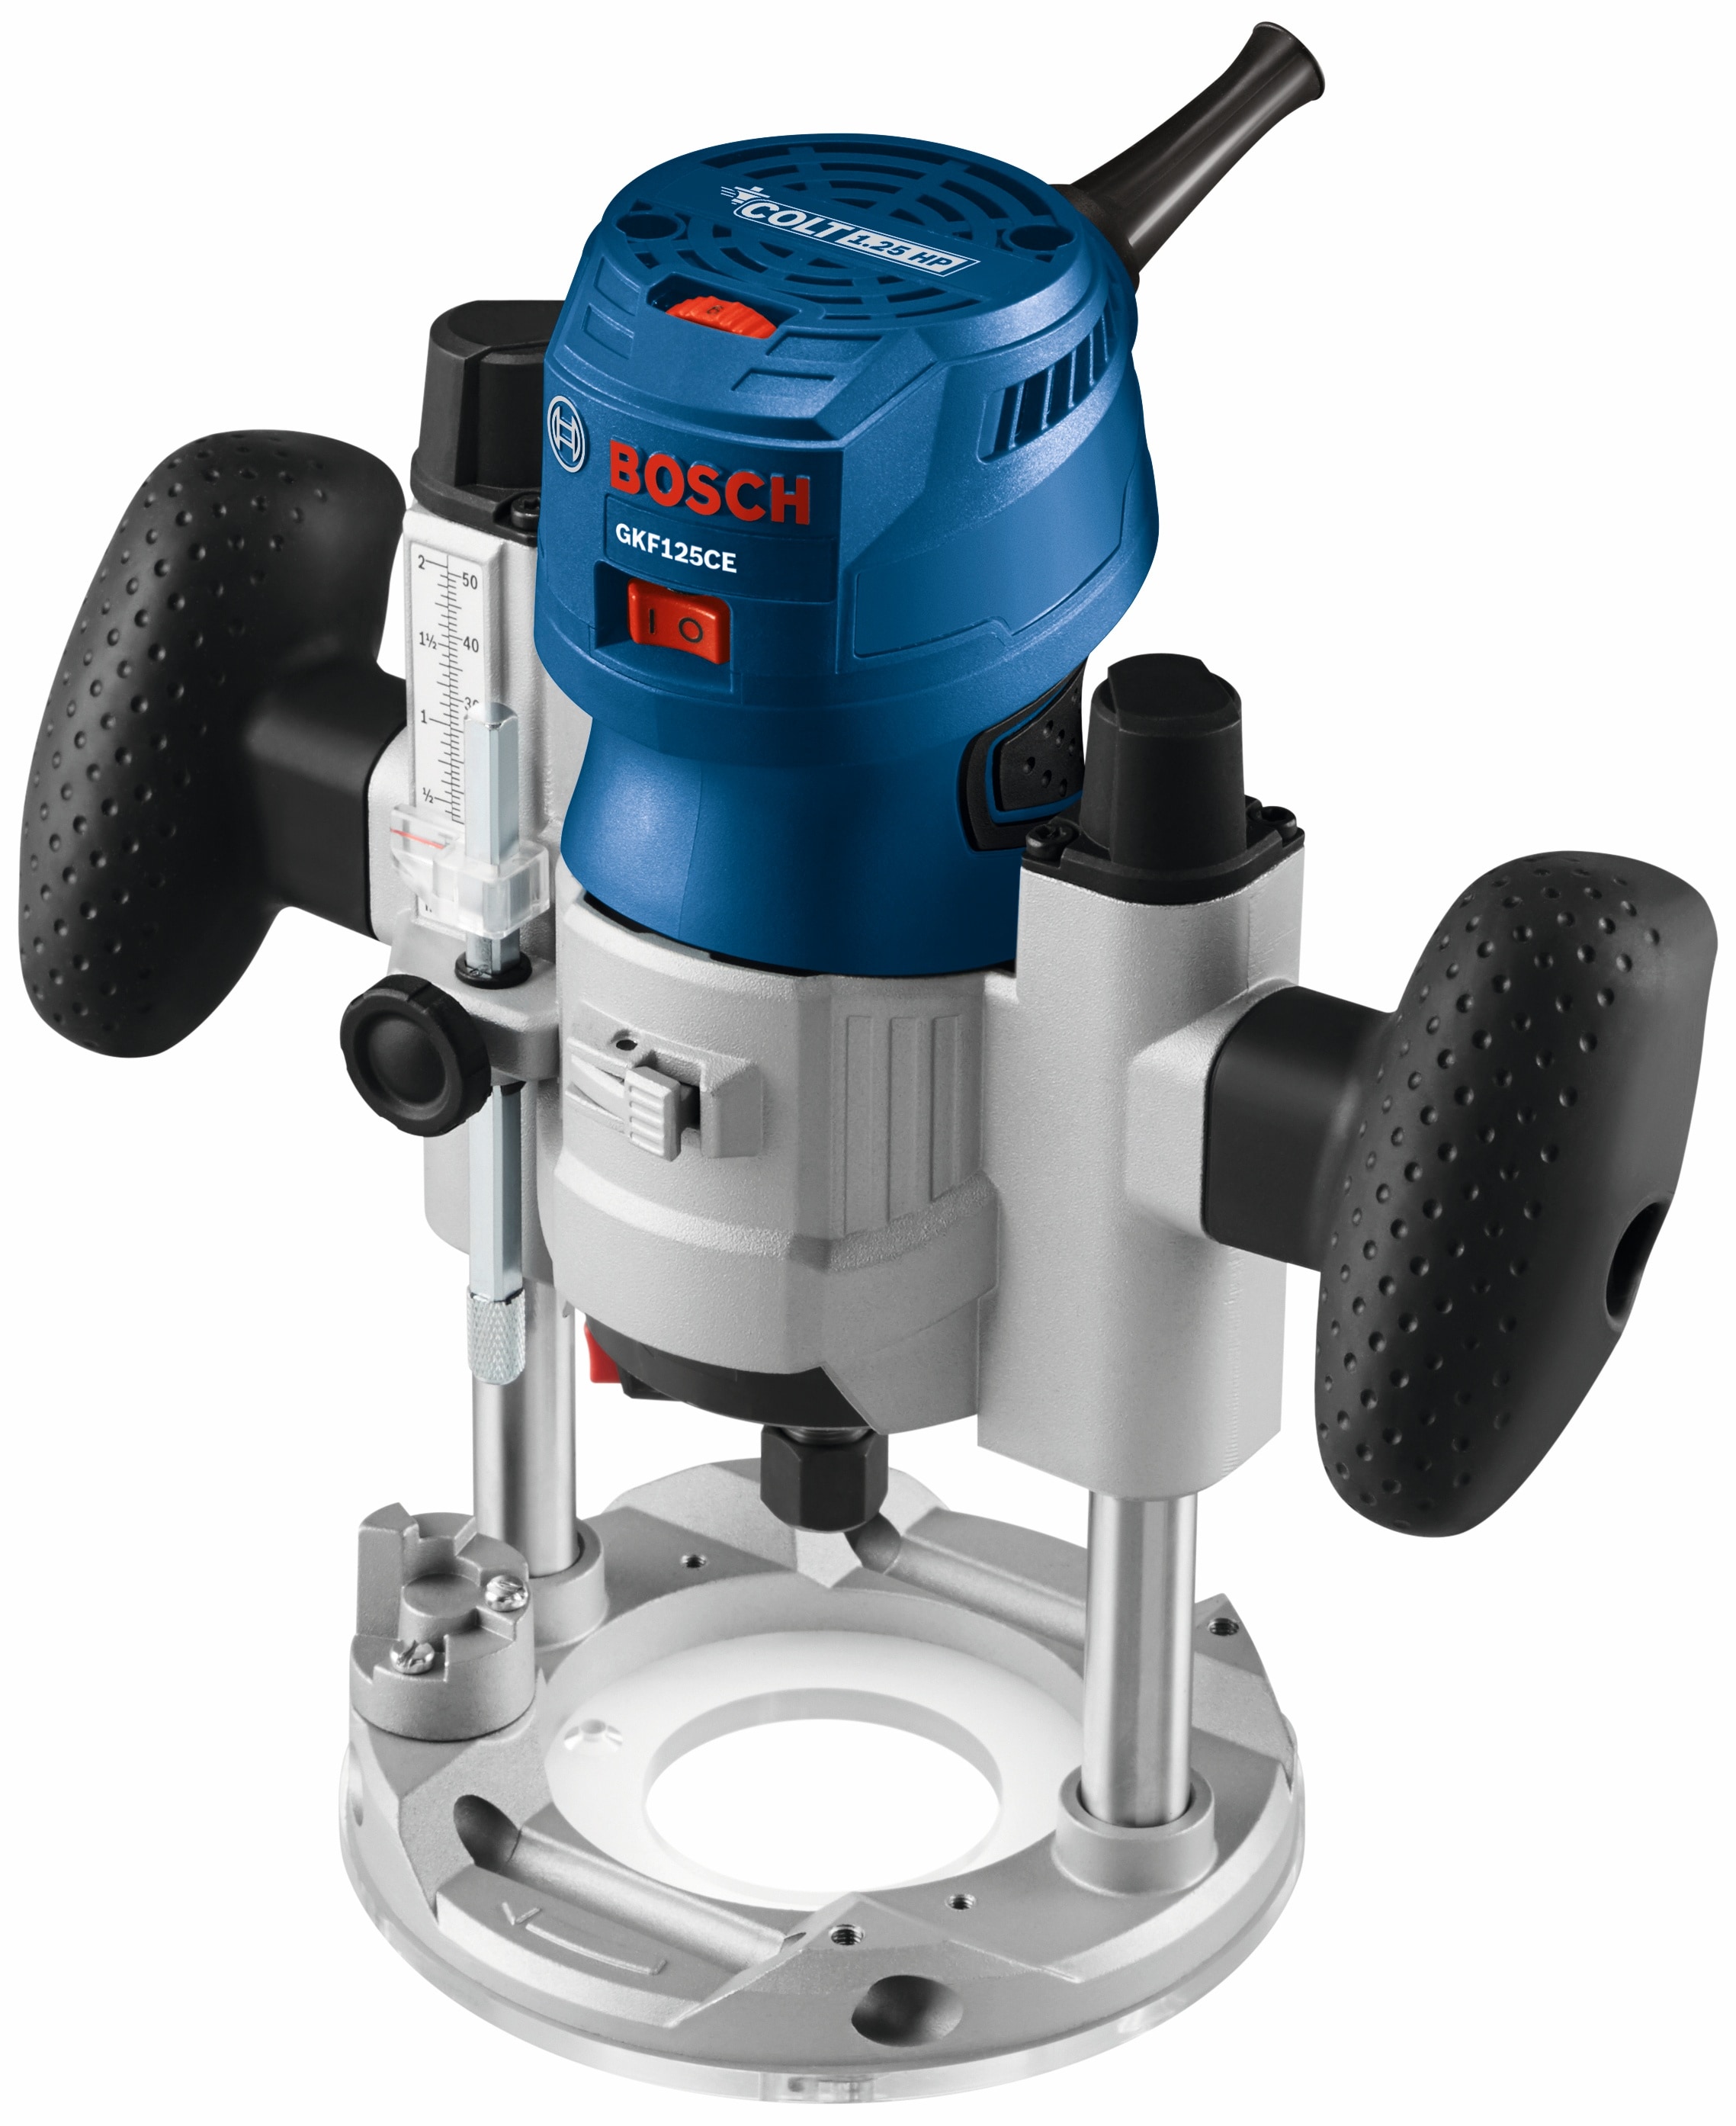 Bosch 1/4-in 7-Amp 1.25-HP Variable Speed Combo Fixed/Plunge